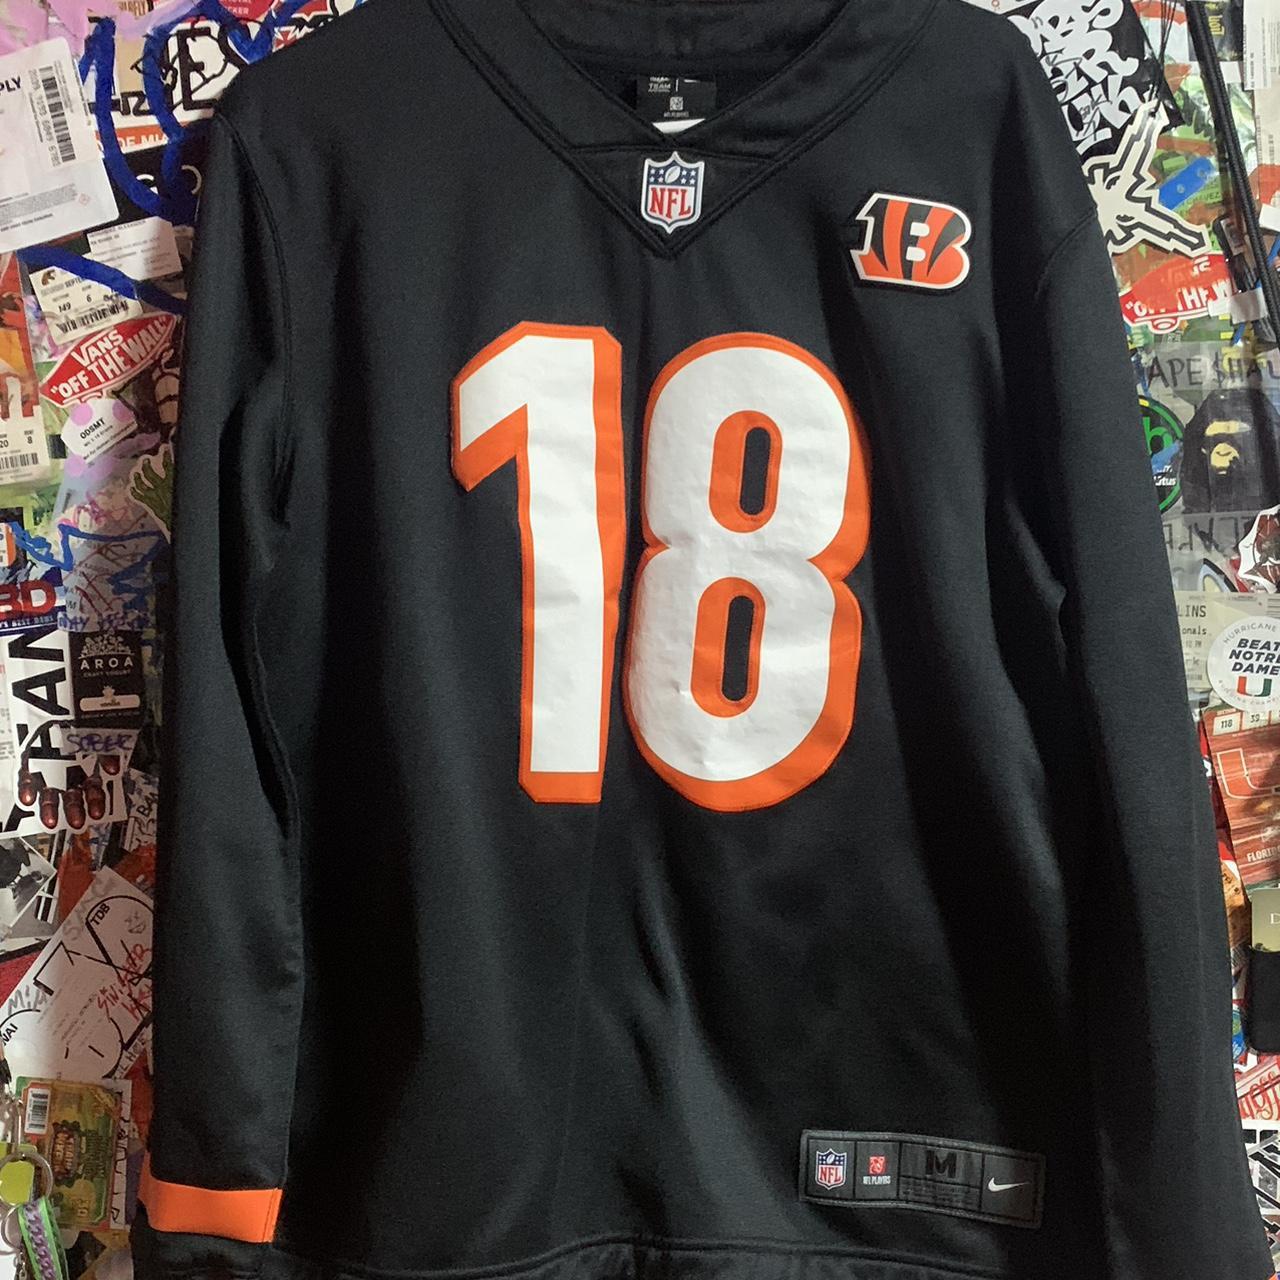 nfl therma jersey